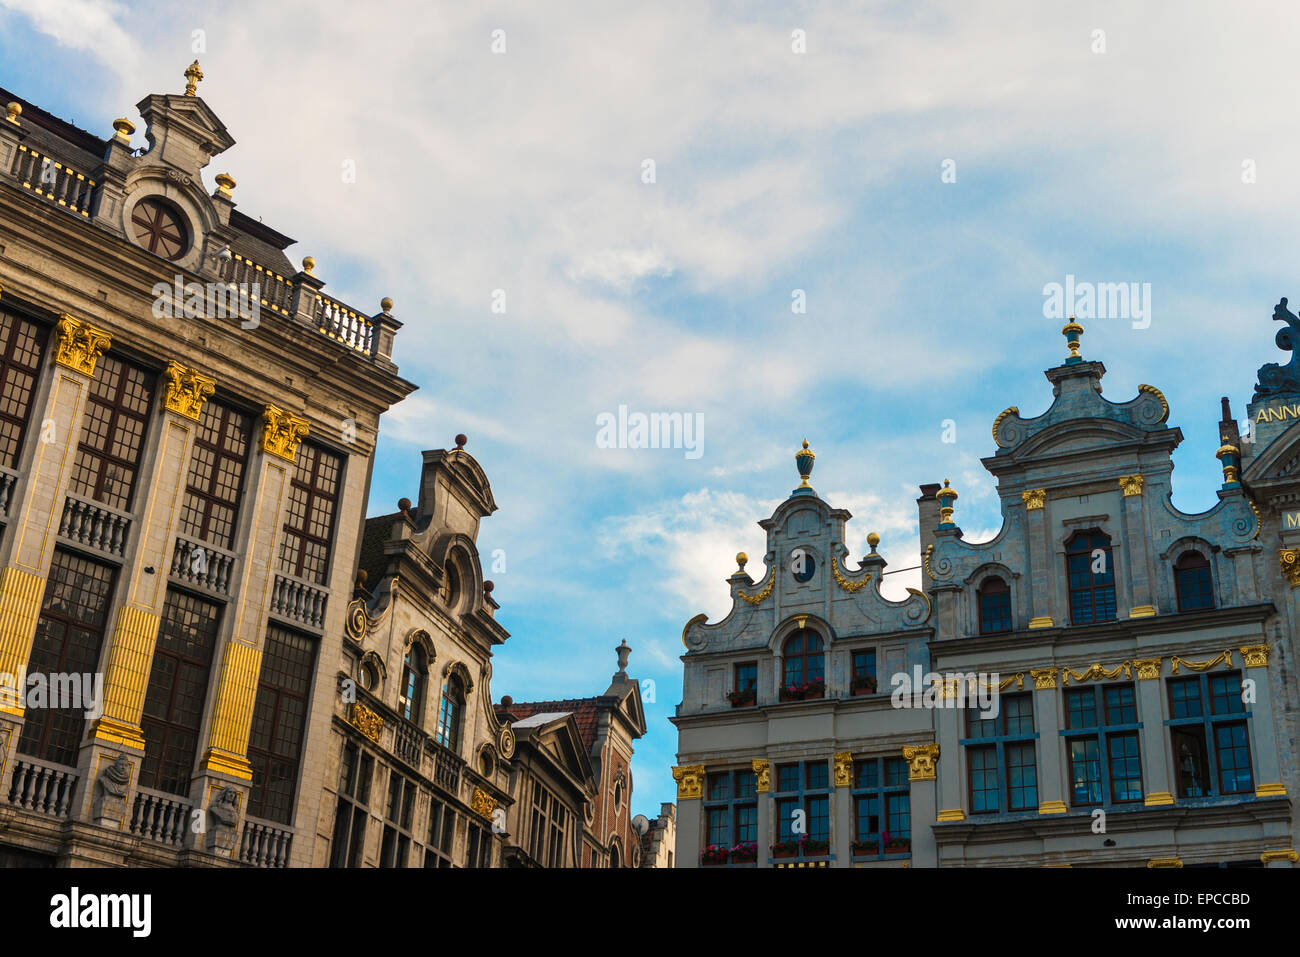 Ornate, 17th century Flemish Renaissance buildings in the south corner of Grand Place, Brussels, Belgium, seen in evening light. Stock Photo